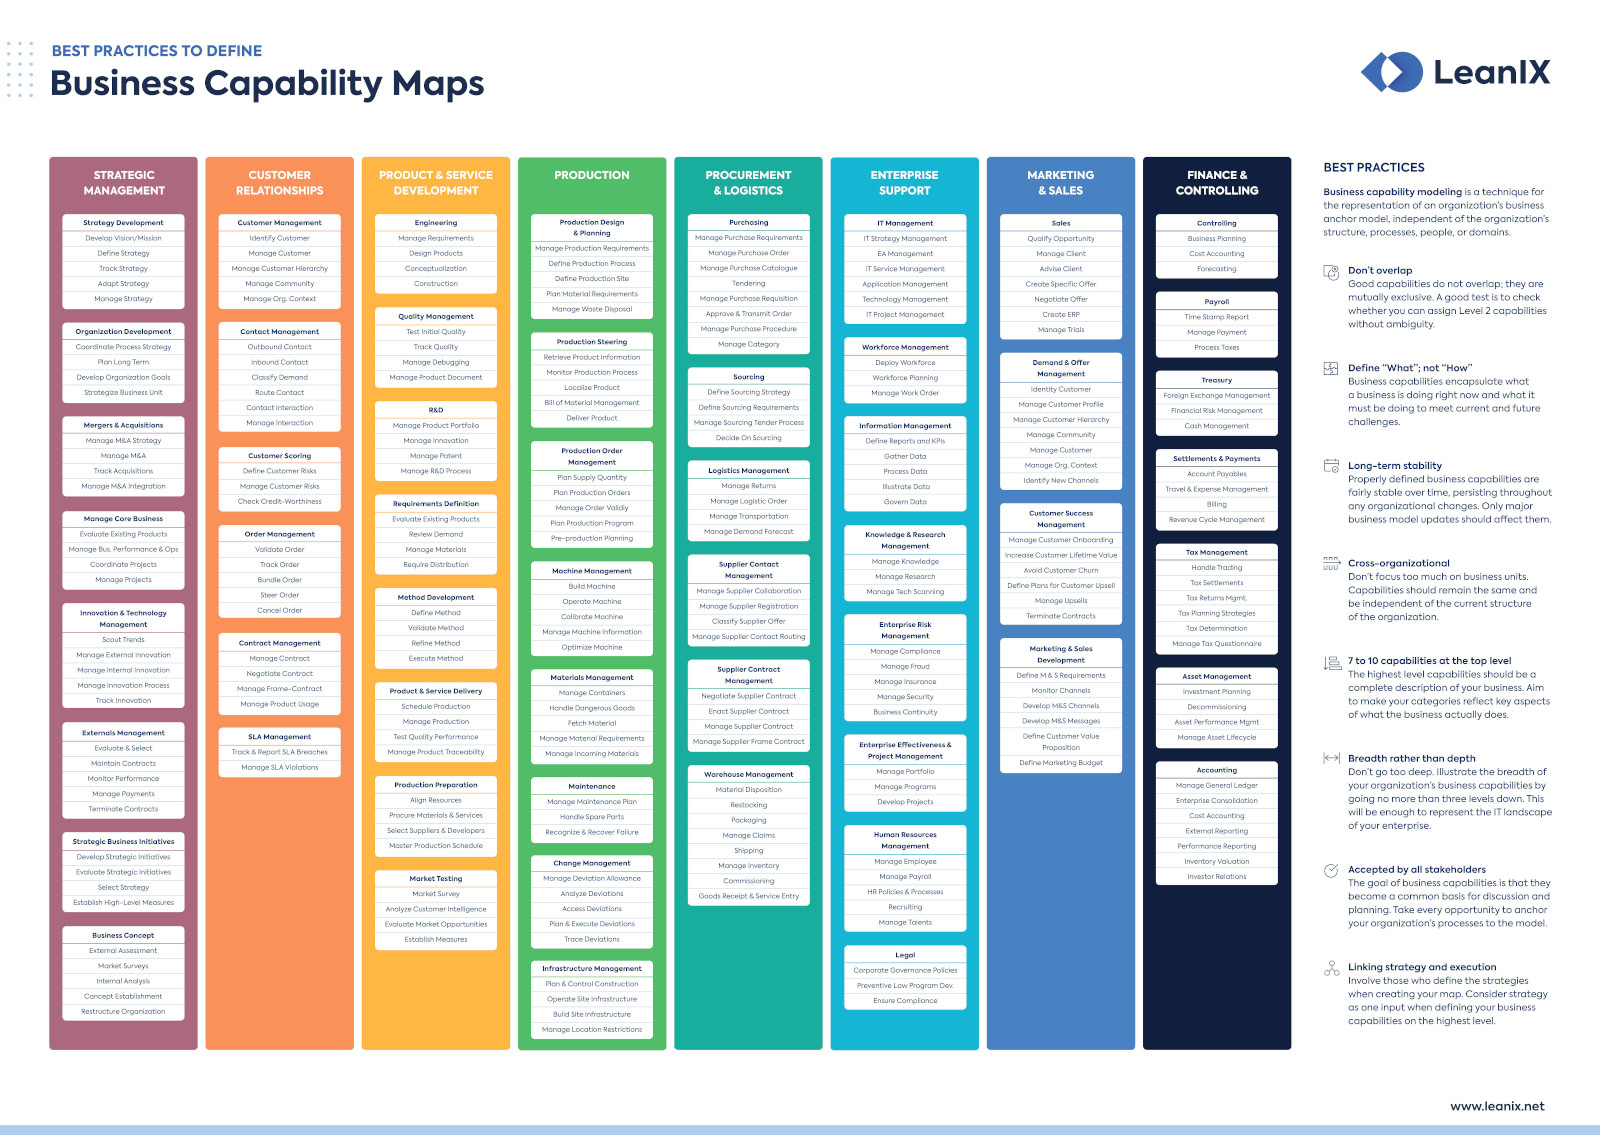 Best-practices-to-define-business-capability-maps_Preview